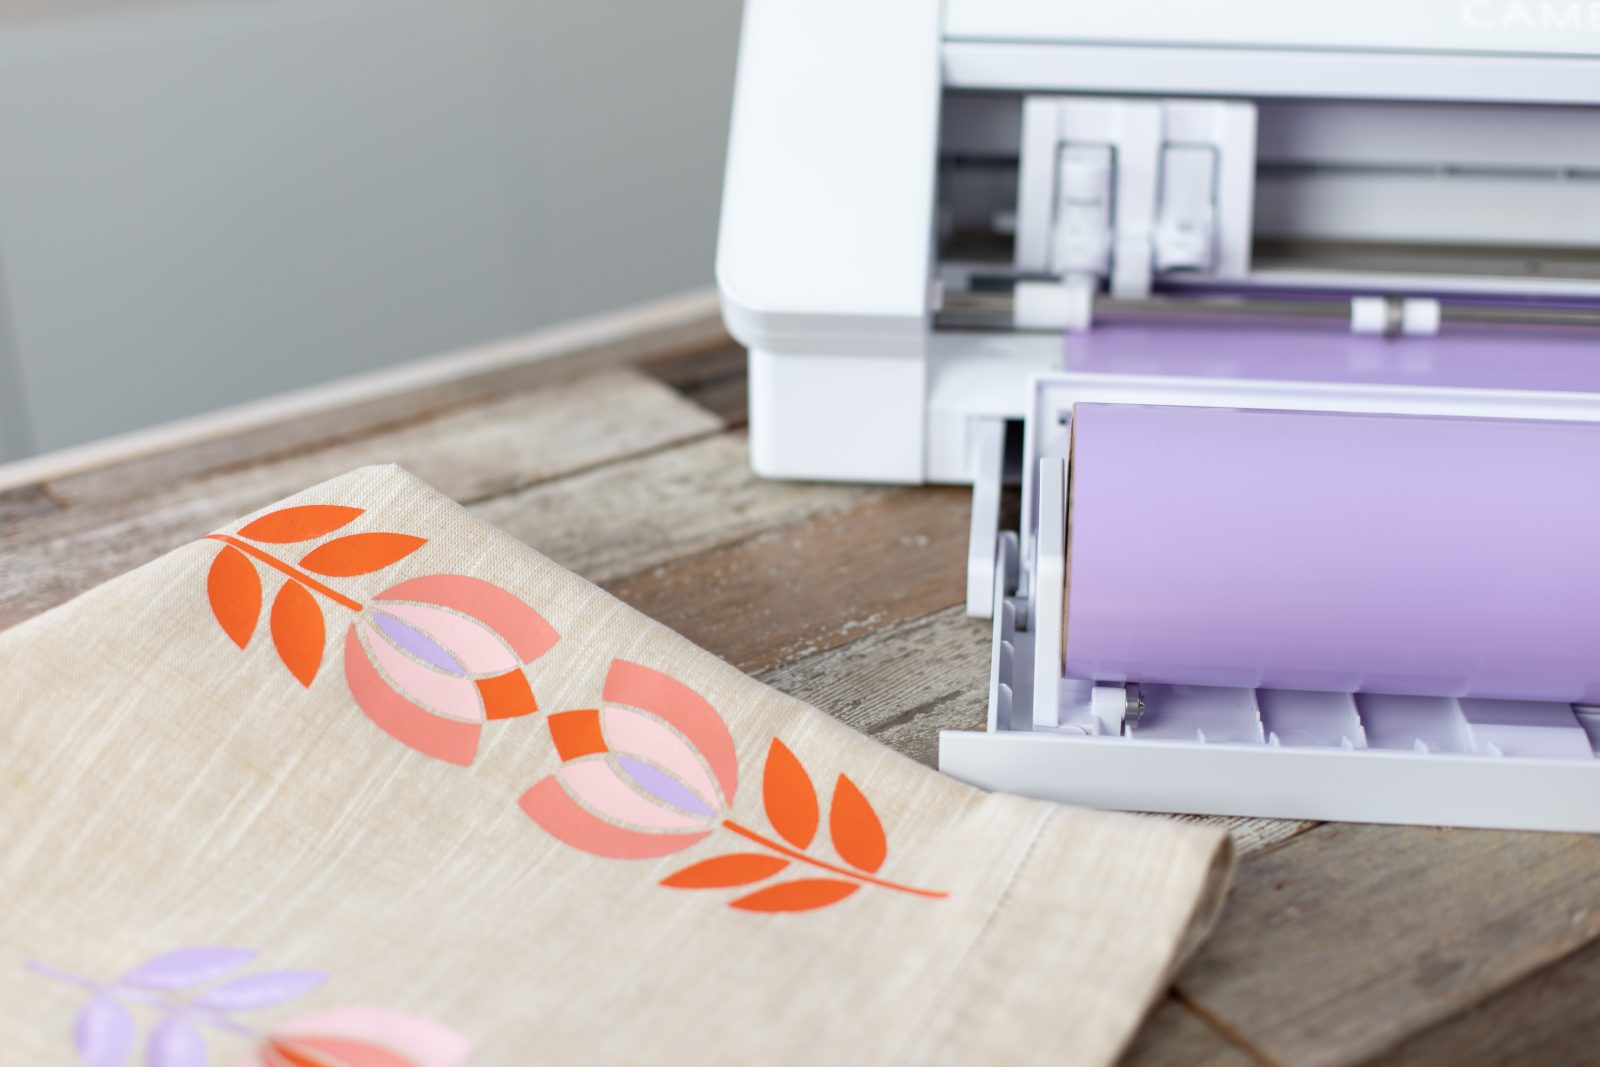 A Spring Floral DIY Vinyl Table Runner (VIDEO) + a tutorial featured by Top US Craft Blog + The Pretty Life Girls